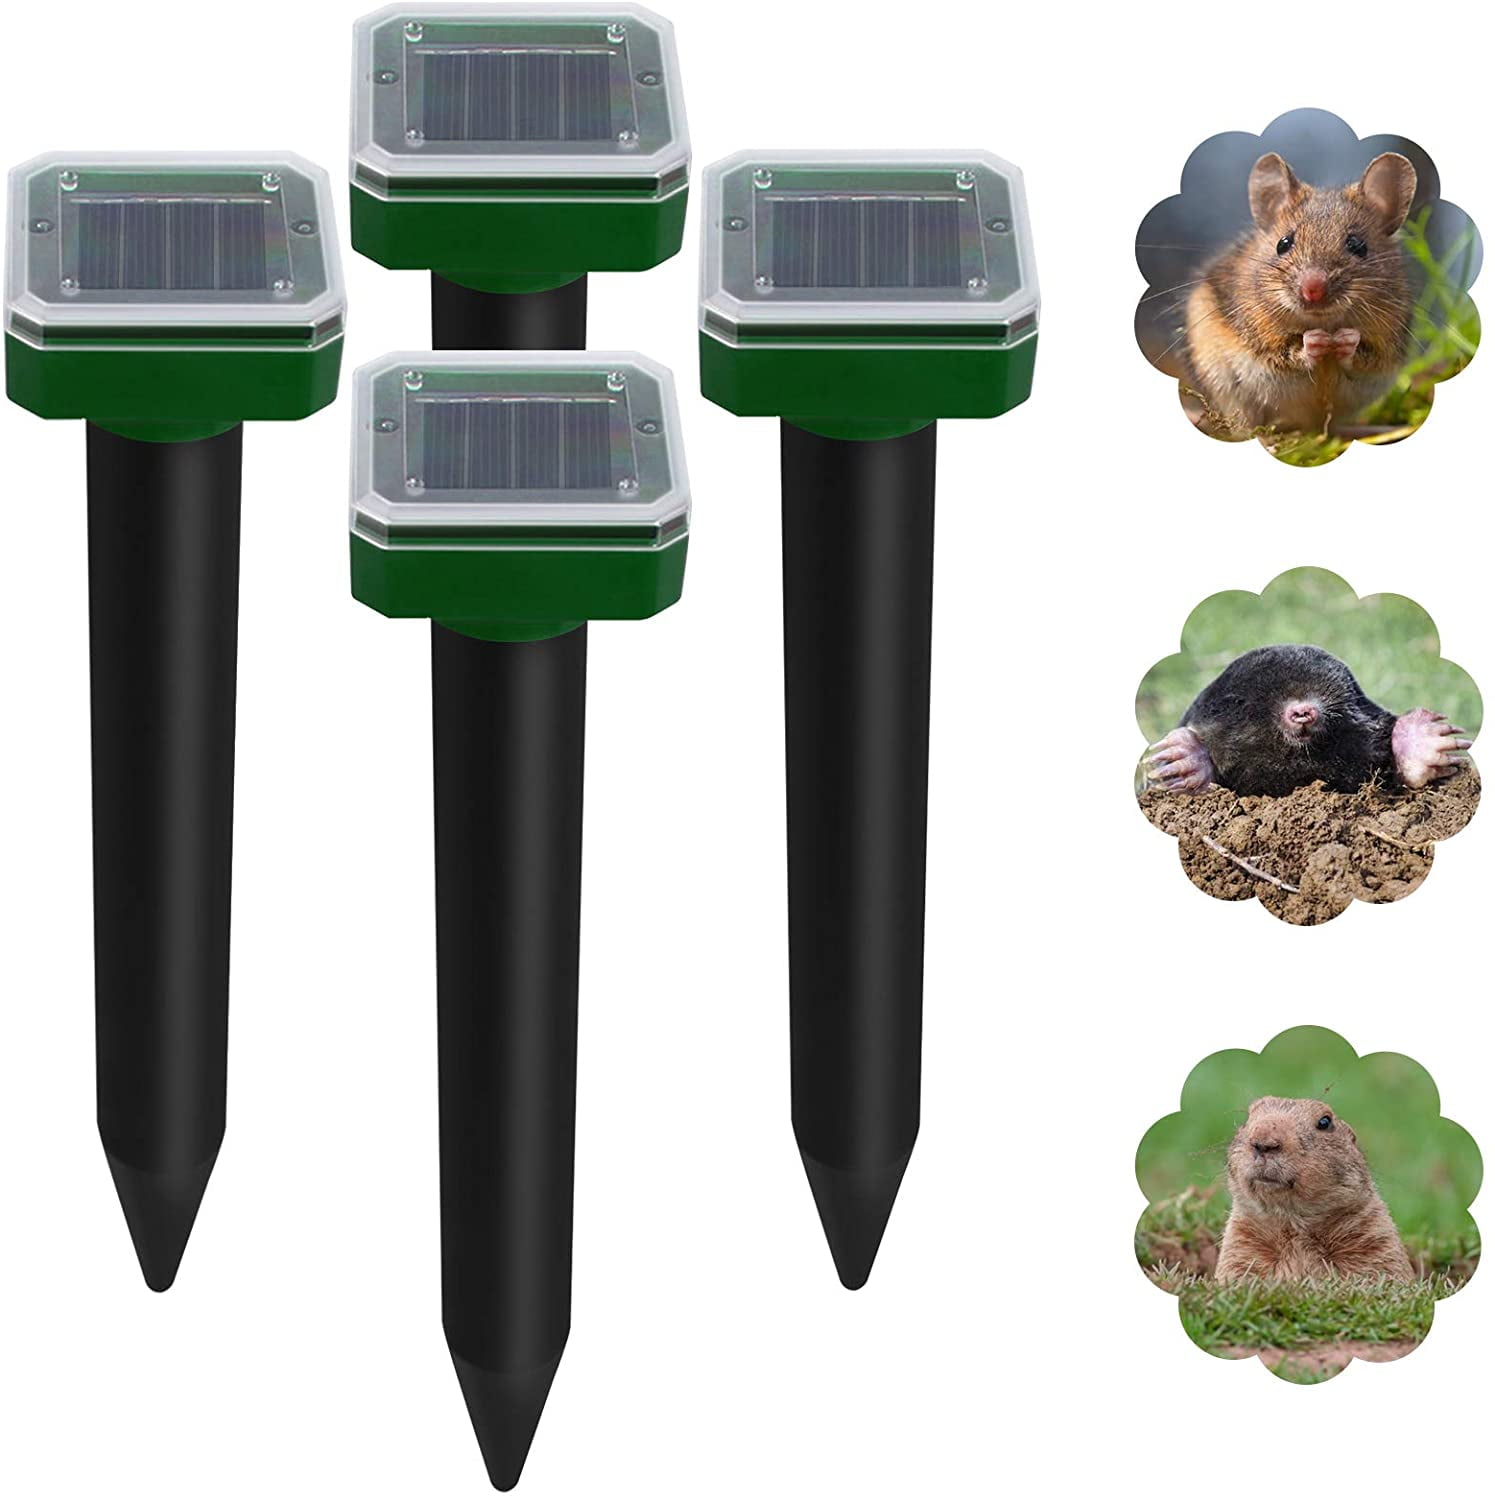 Snake Chaser Gopher Mole Vole Repeller for Lawn Garden Yards Outdoor Waterproof 4-Pack Solar Mole Repellent Solar-Powered Mouse 